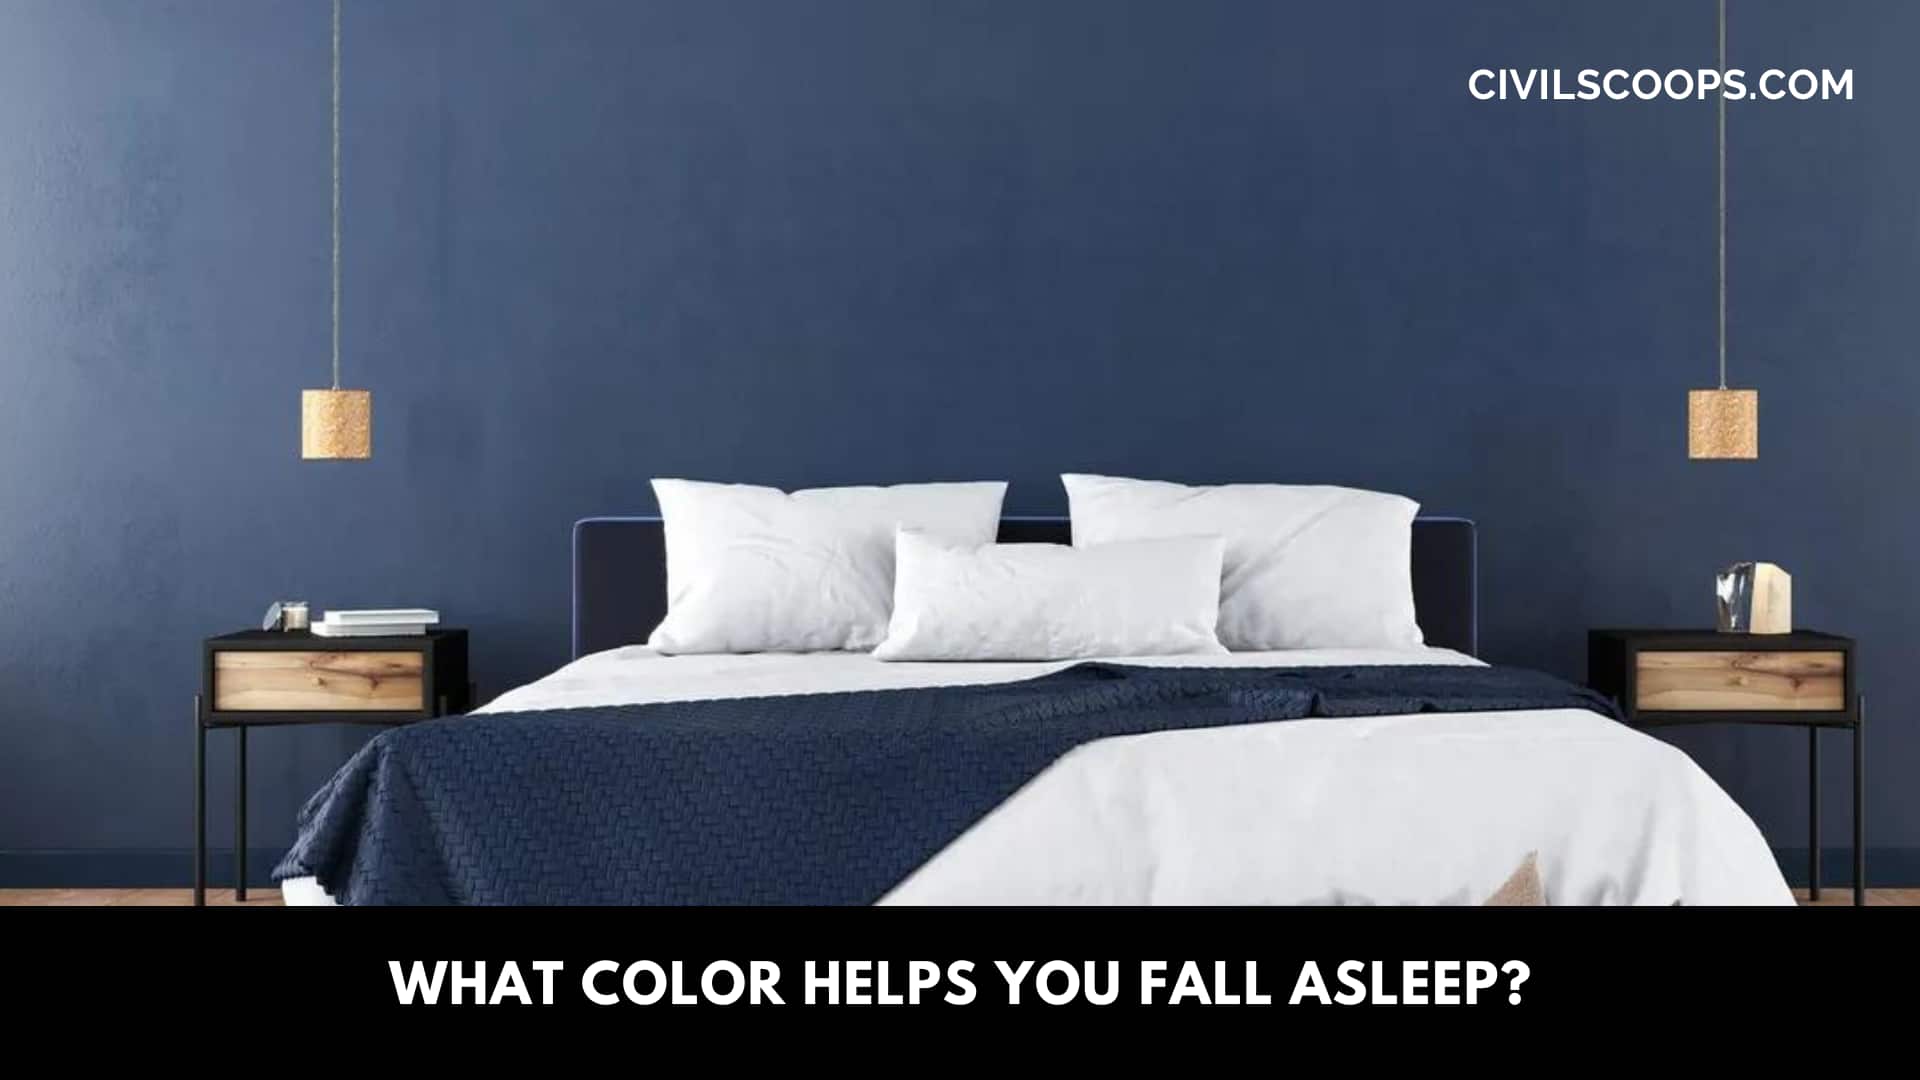 What Color Helps You Fall Asleep?